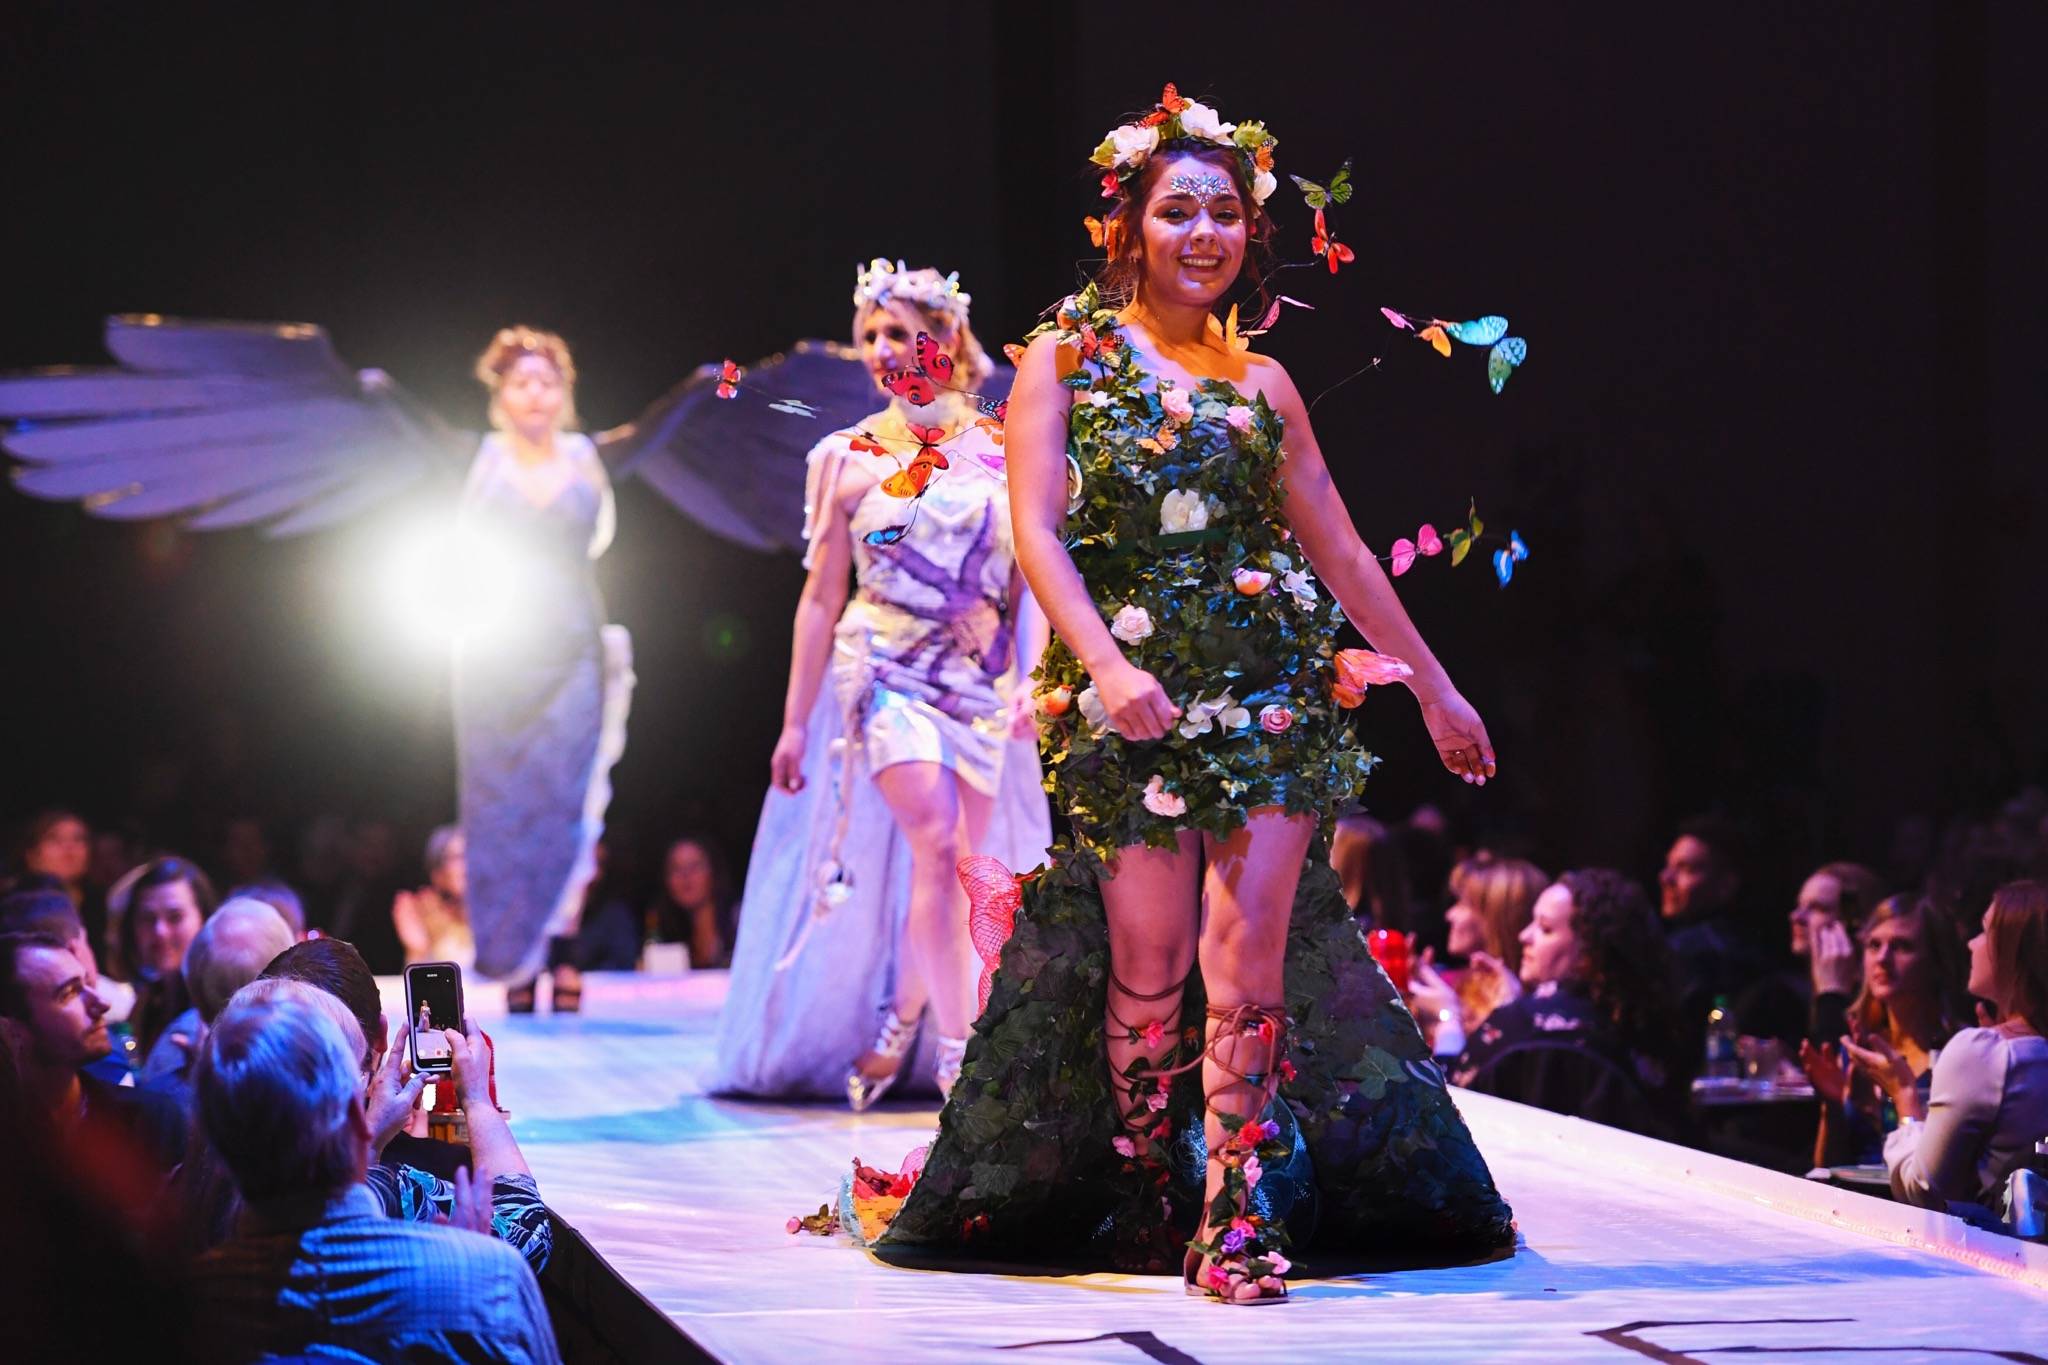 With the first show done, Wearable Art shares theme for next year